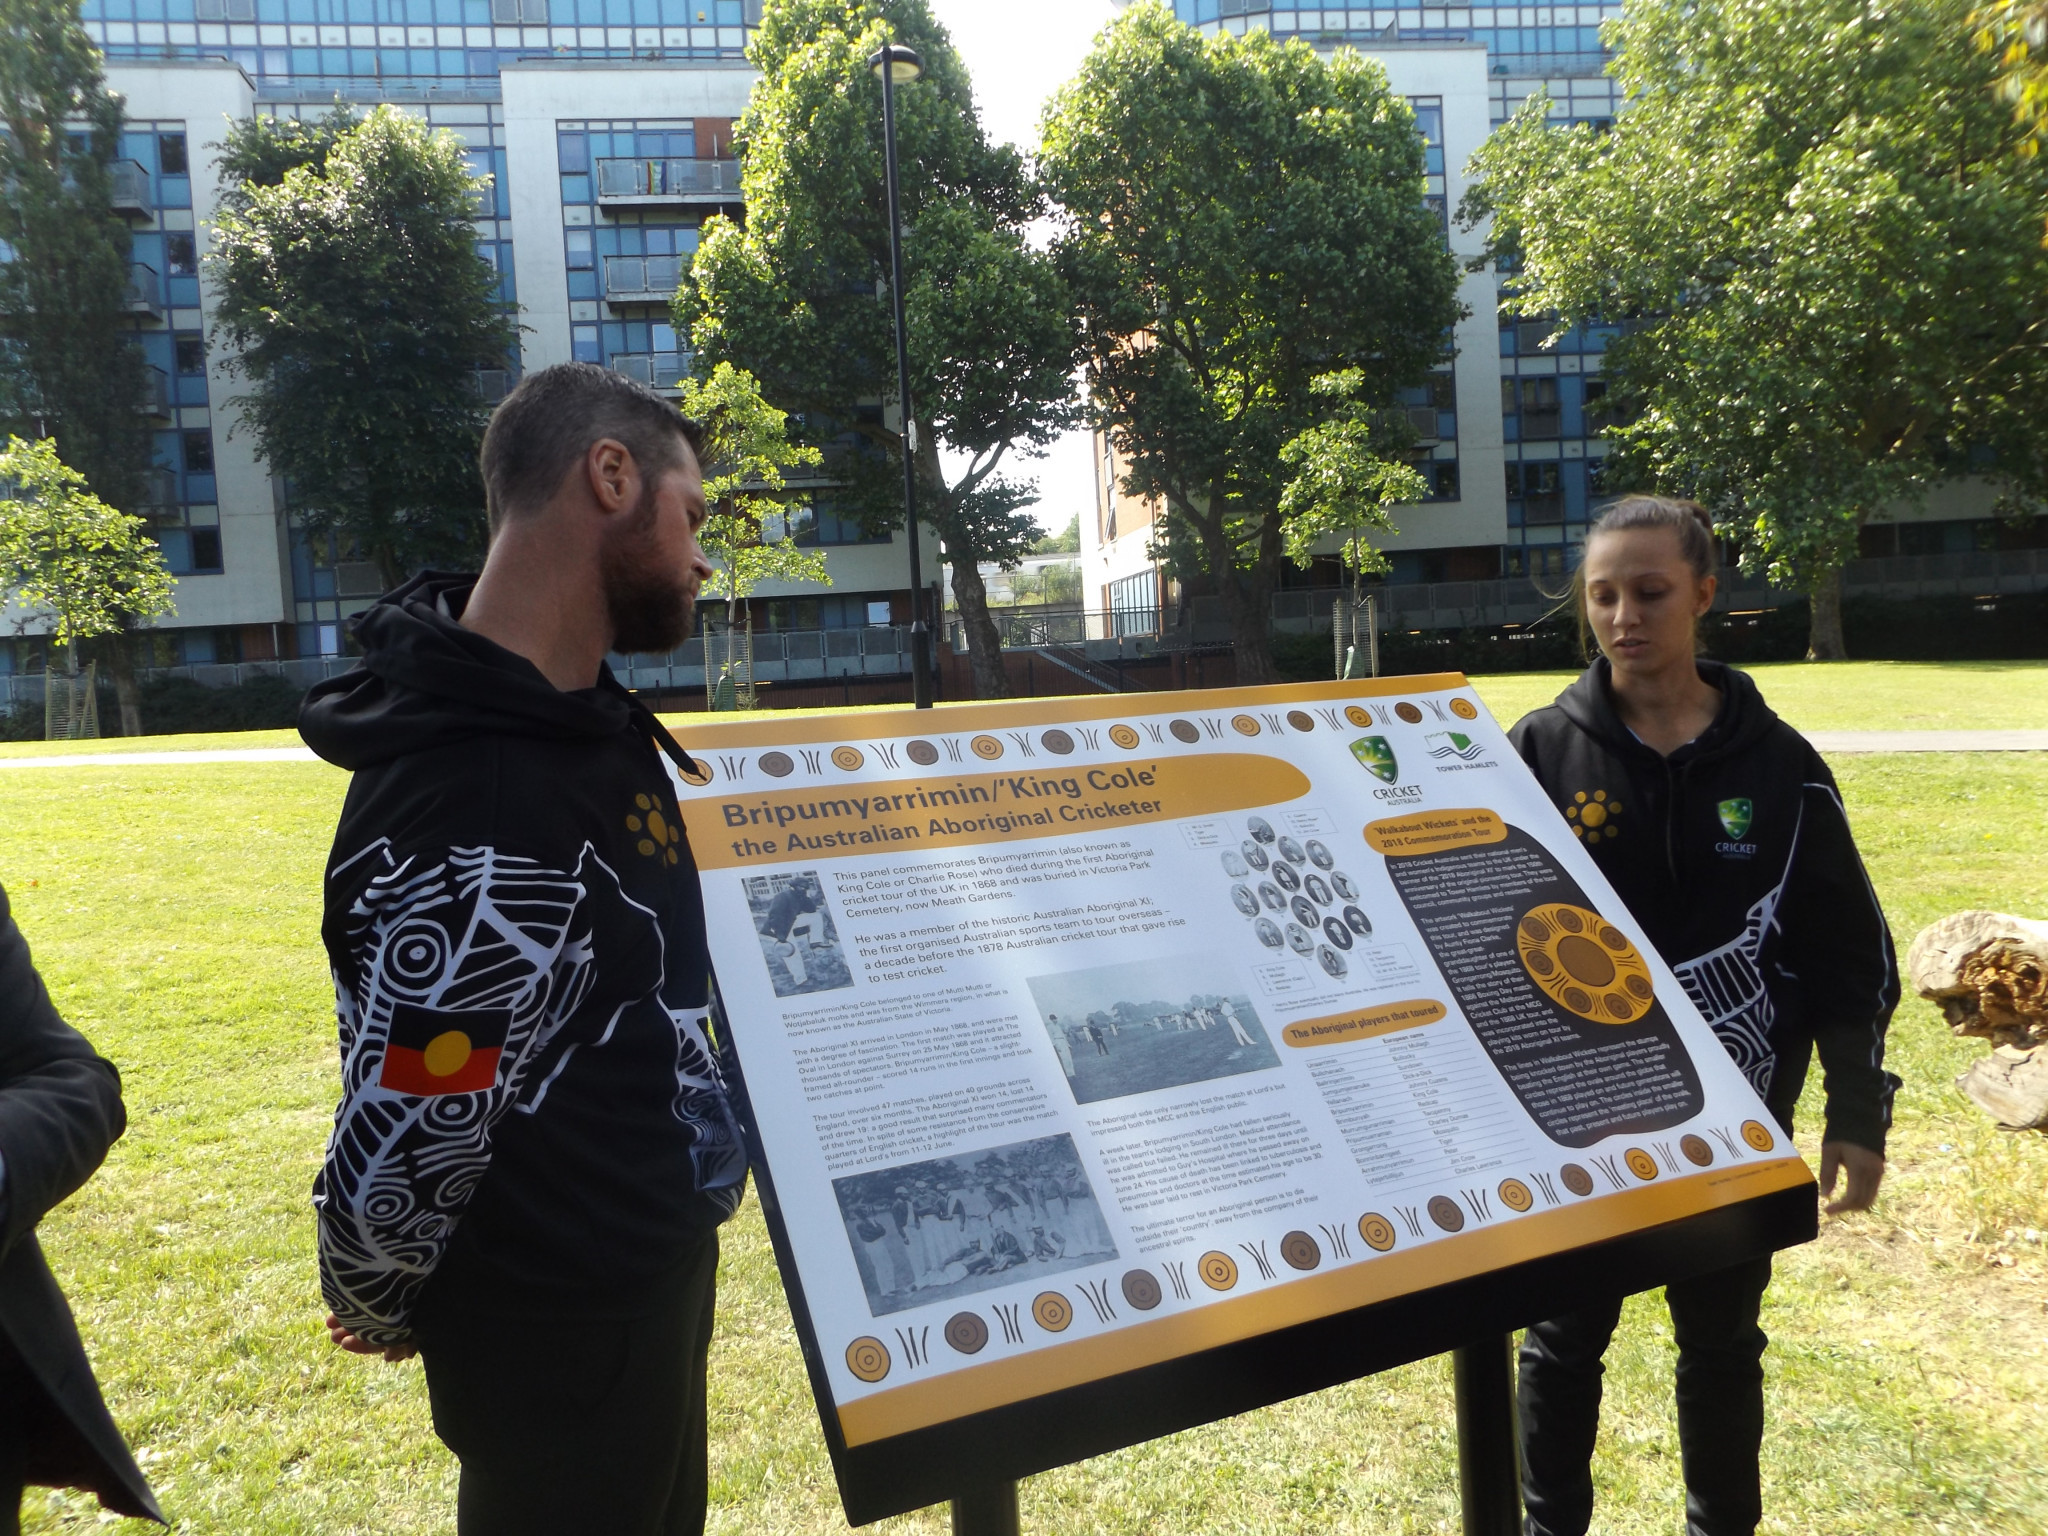 Australian indigenous cricketers unveil monument to remember fallen player